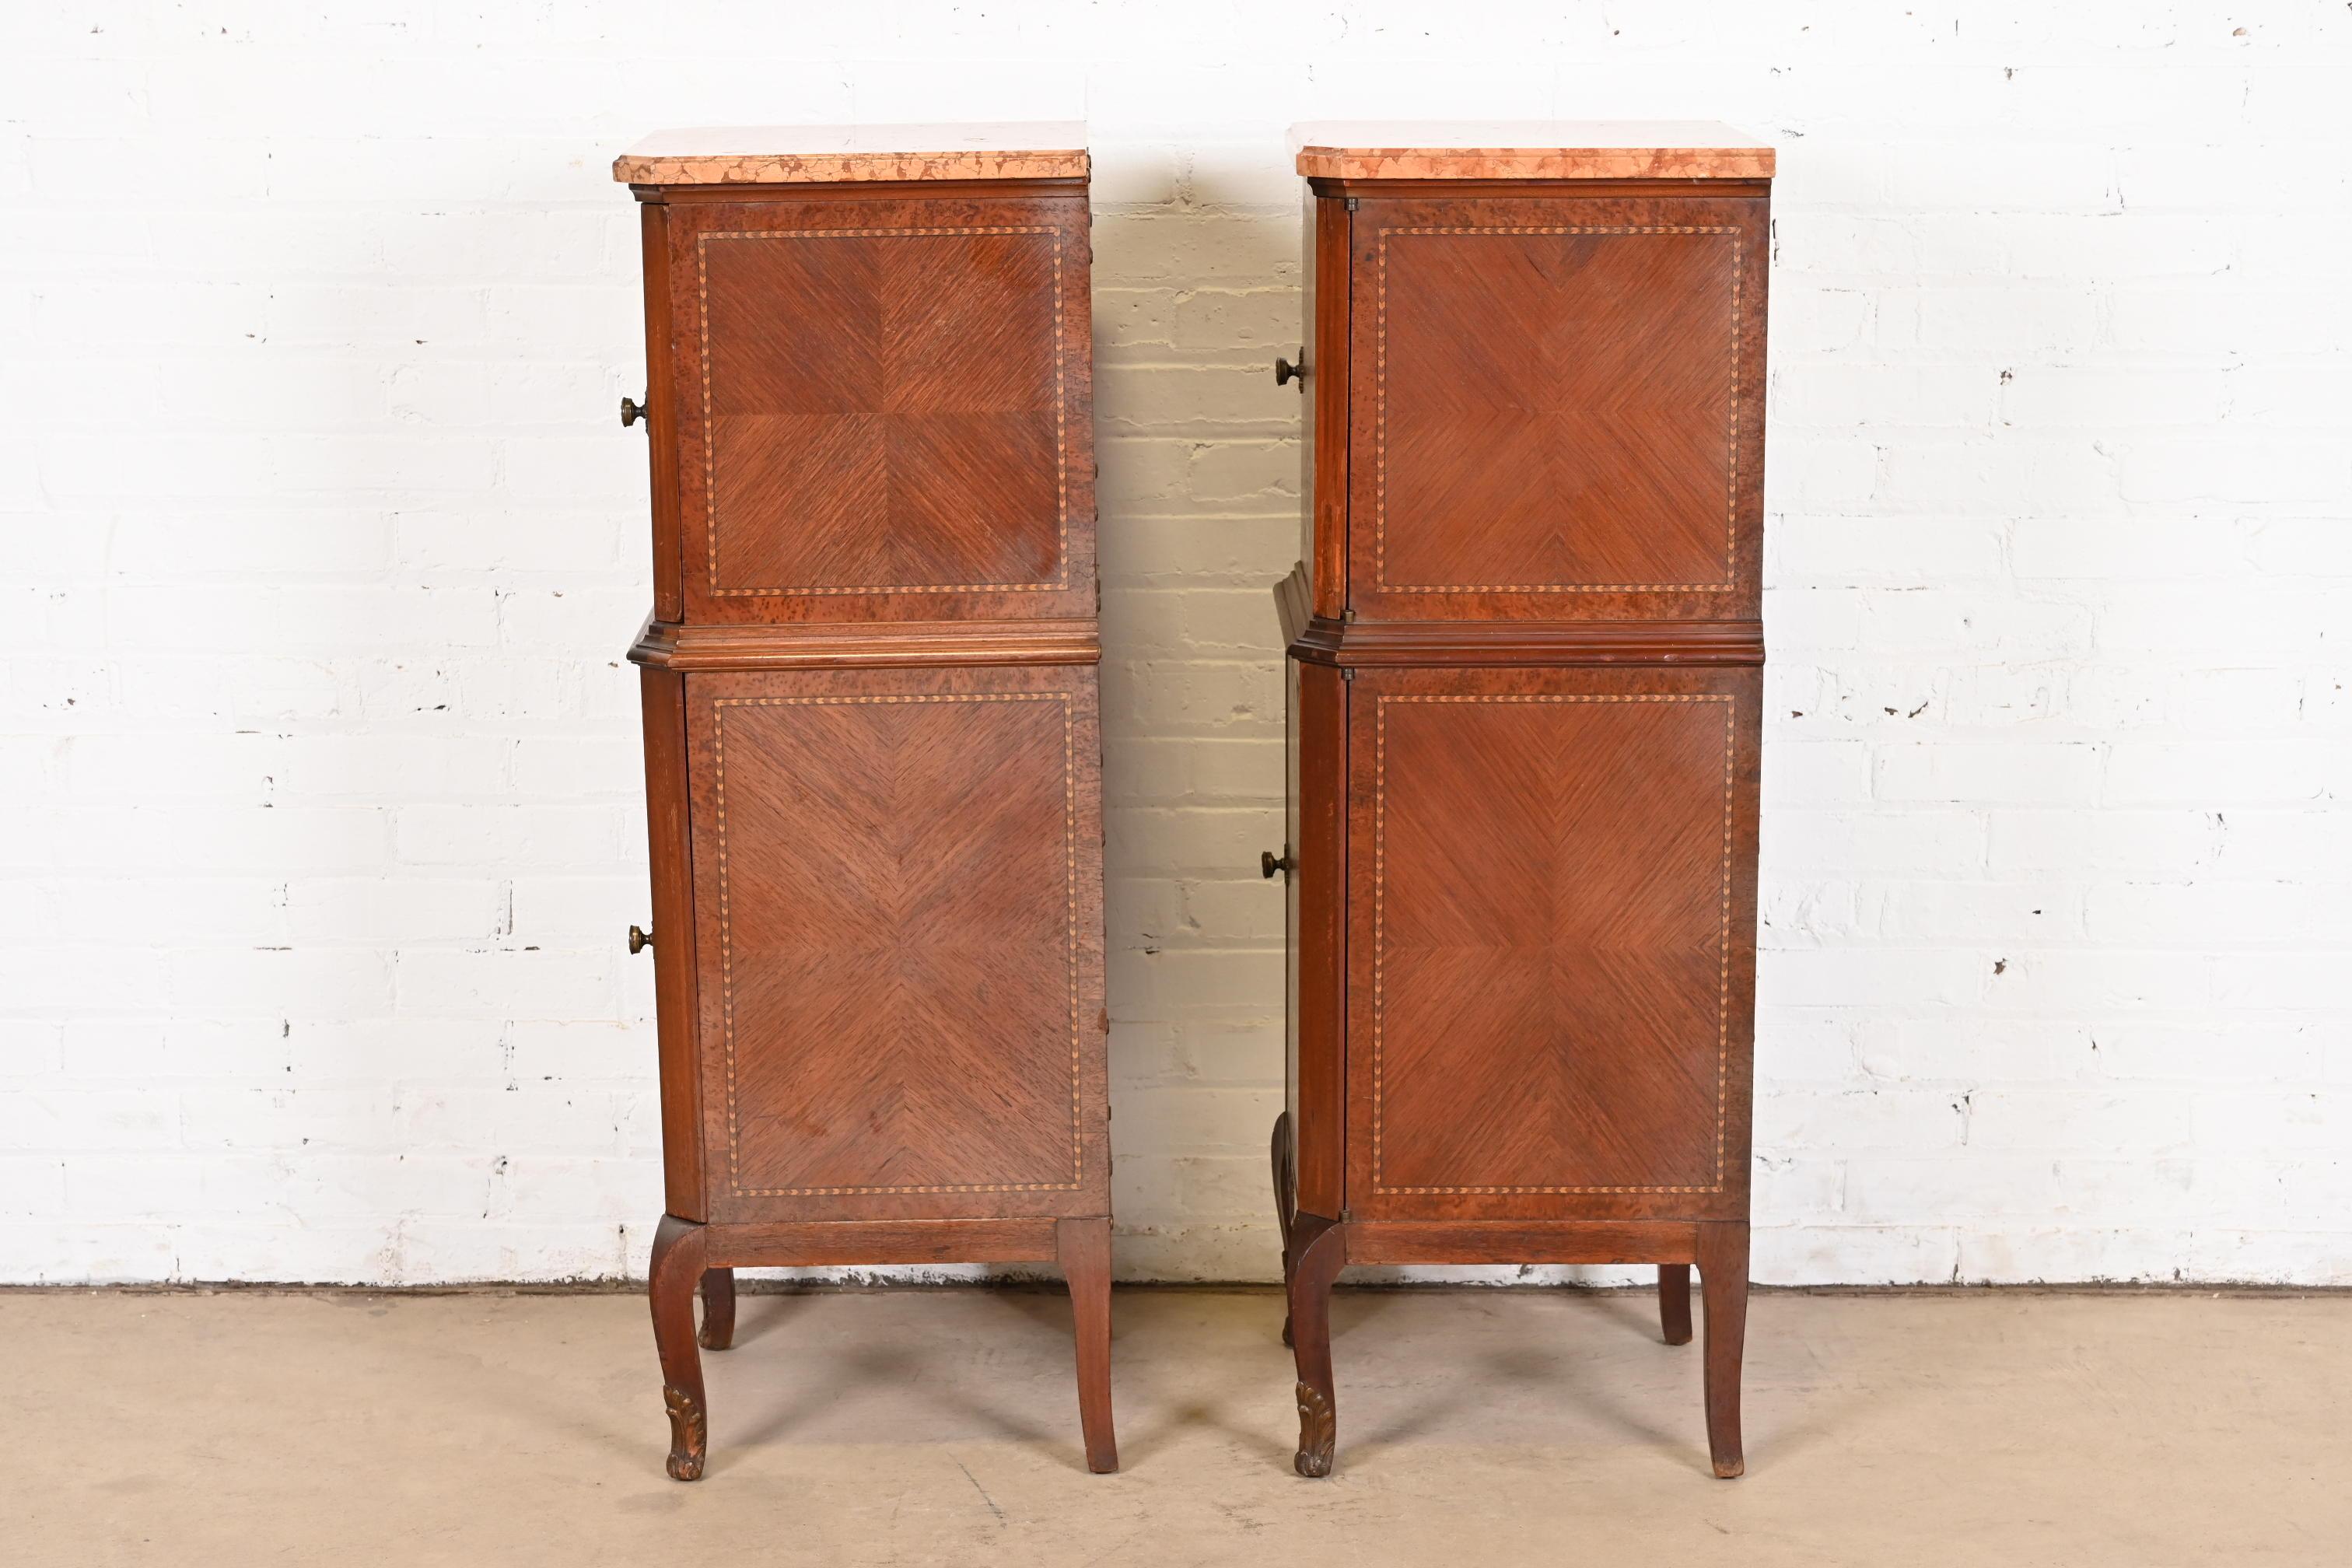 French Louis XV Kingwood Inlaid Marquetry Marble Top Lingerie Chests, Pair For Sale 12